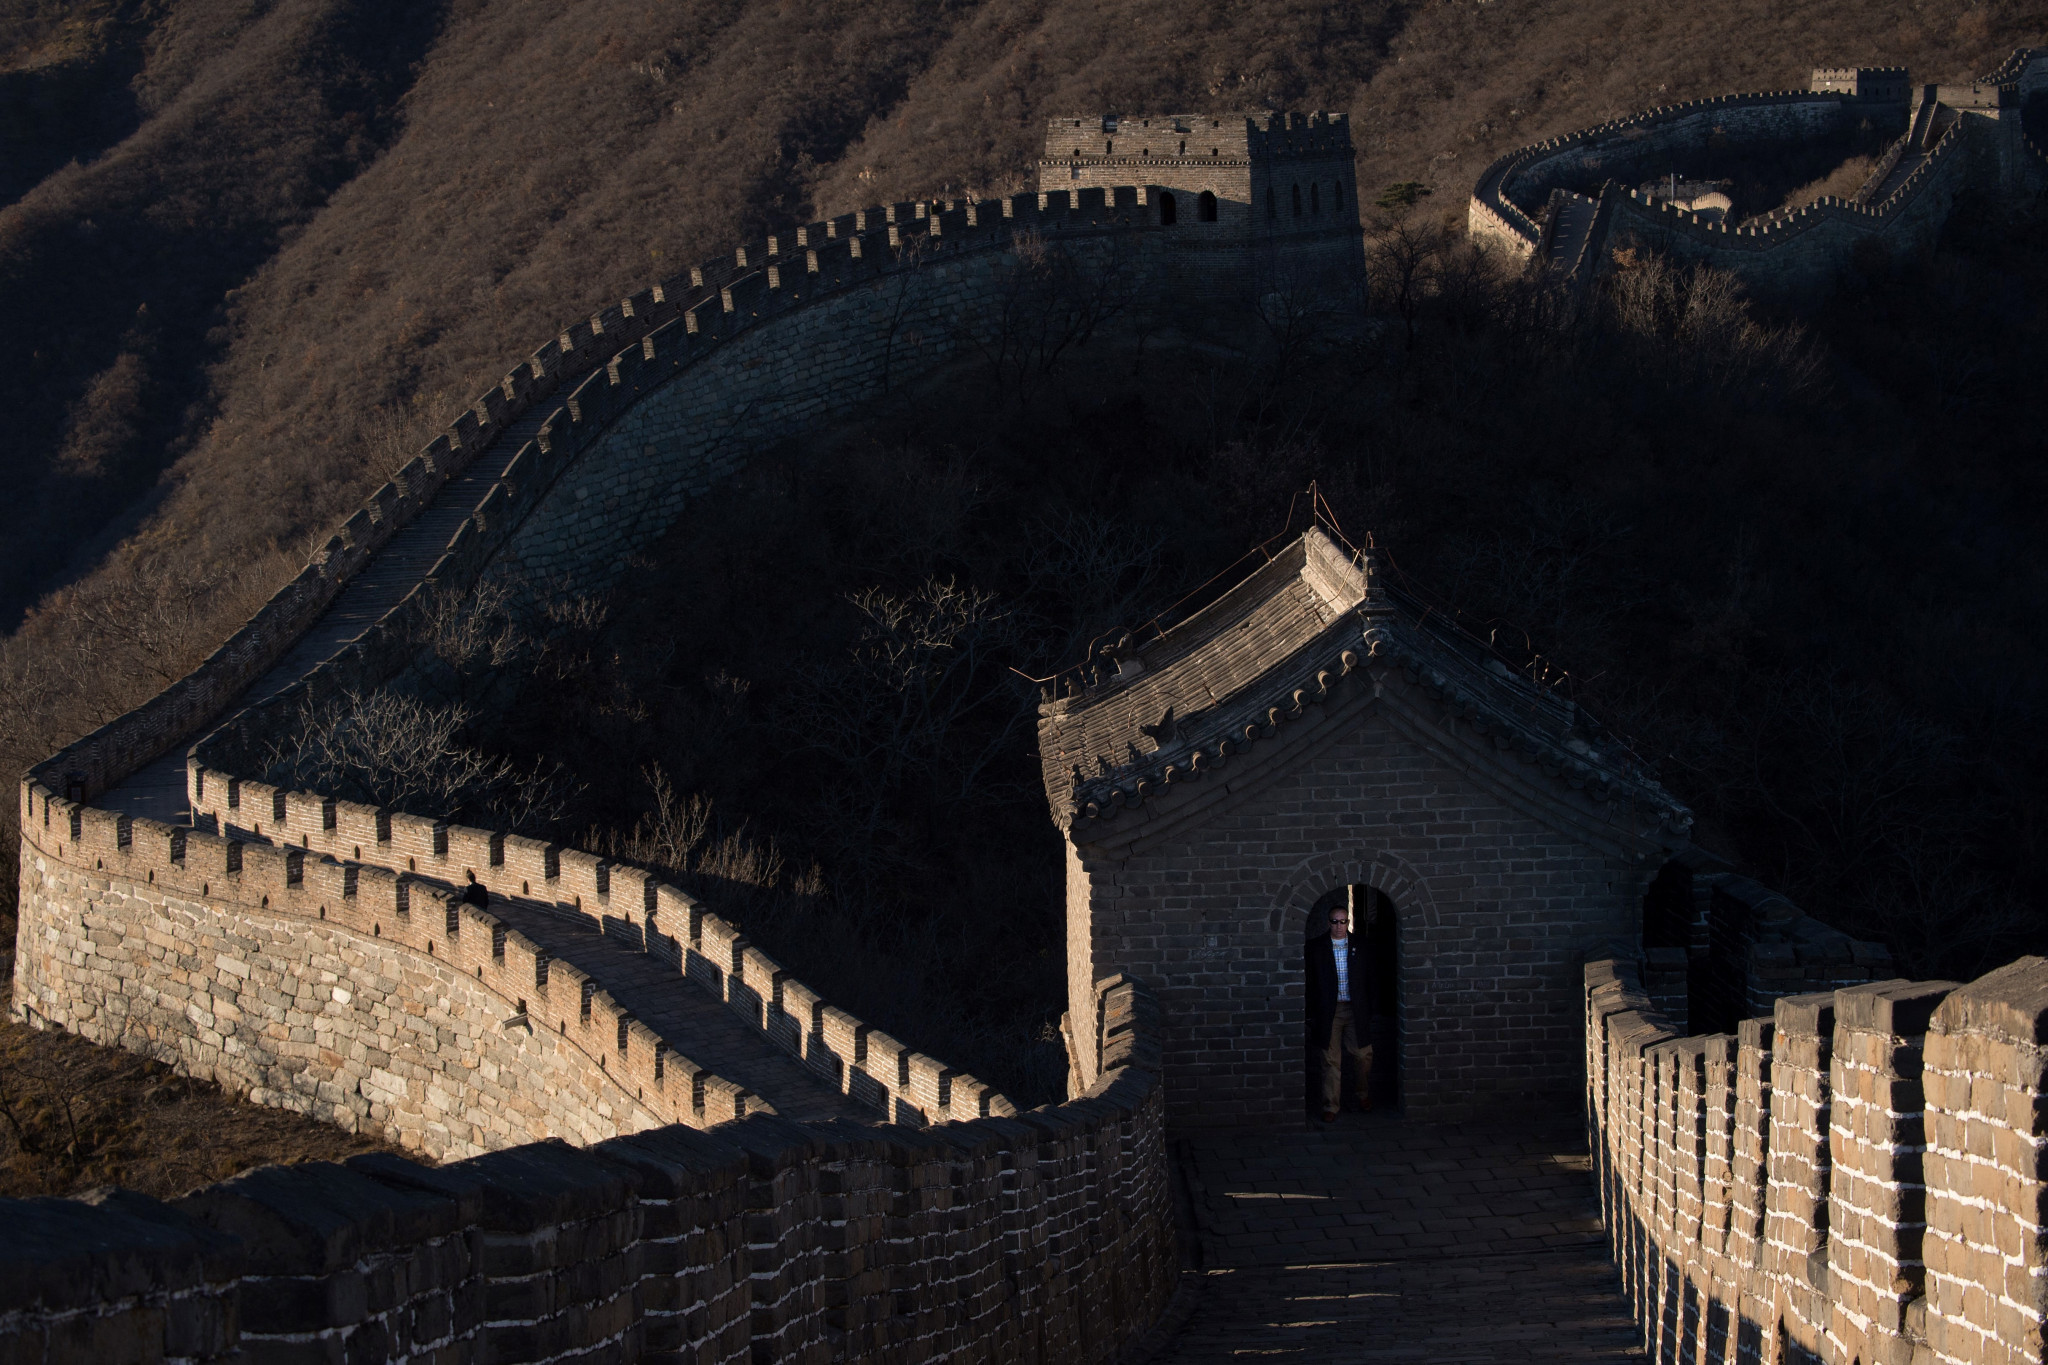 There are fears that the new line could impact the Great Wall of China ©Getty Images